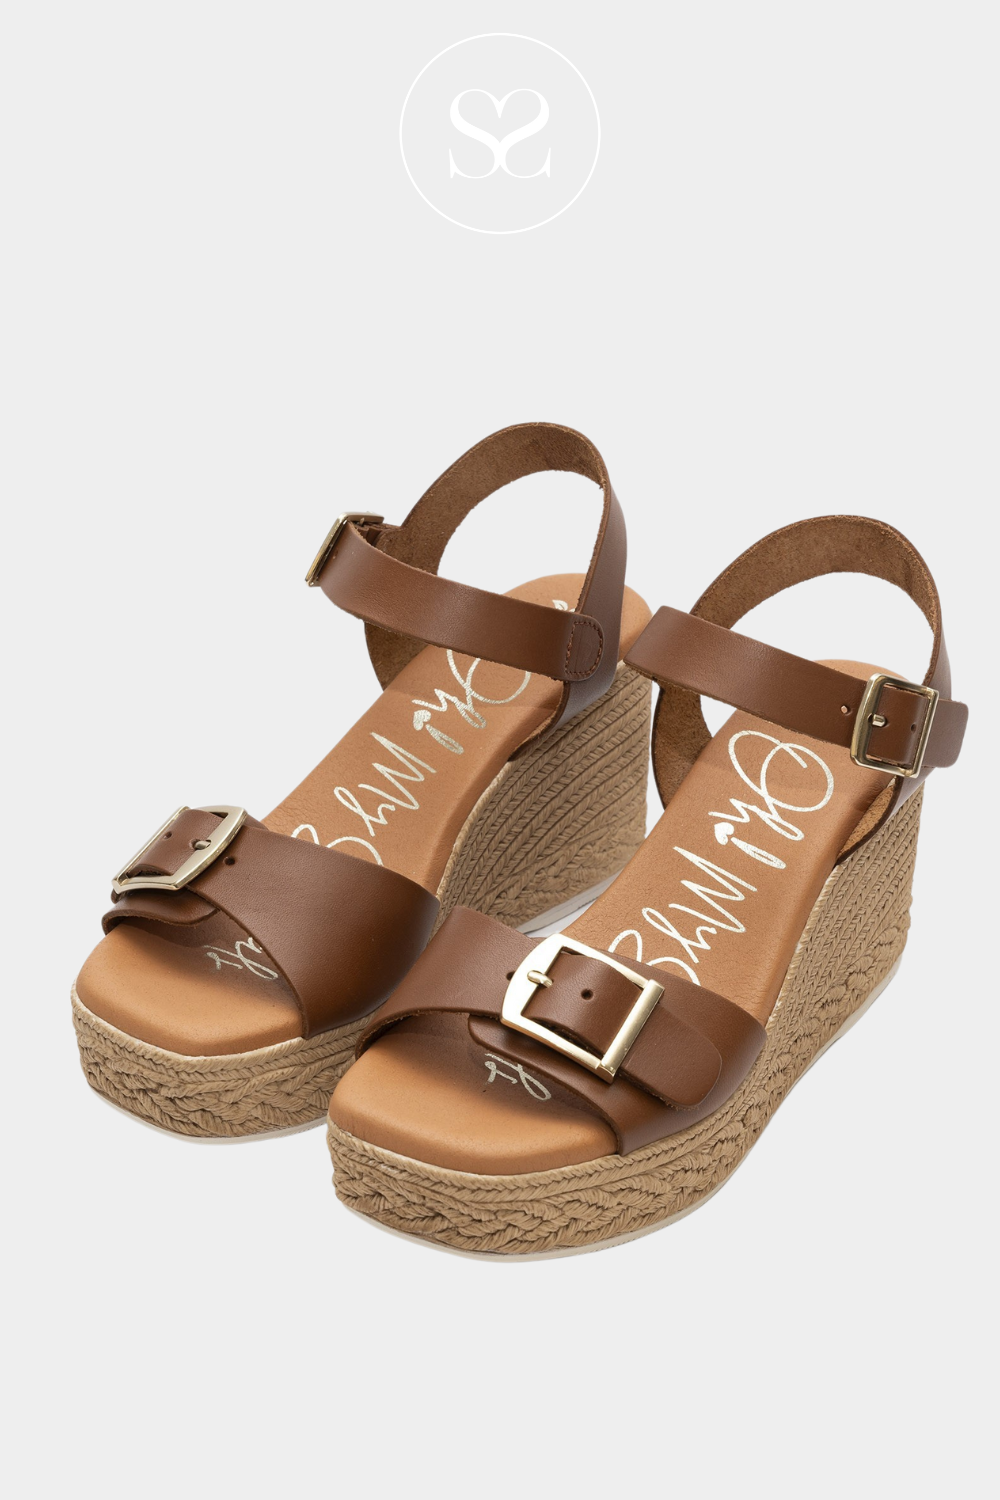 OH MY SANDALS 5459 TAN WEDGE PLATFORM SOLE SANDALS WITH ADJUSTABLE ANKLE STRAP WITH GOLD BUCKLE AND WIDE STRAP ACROSS THE TOES